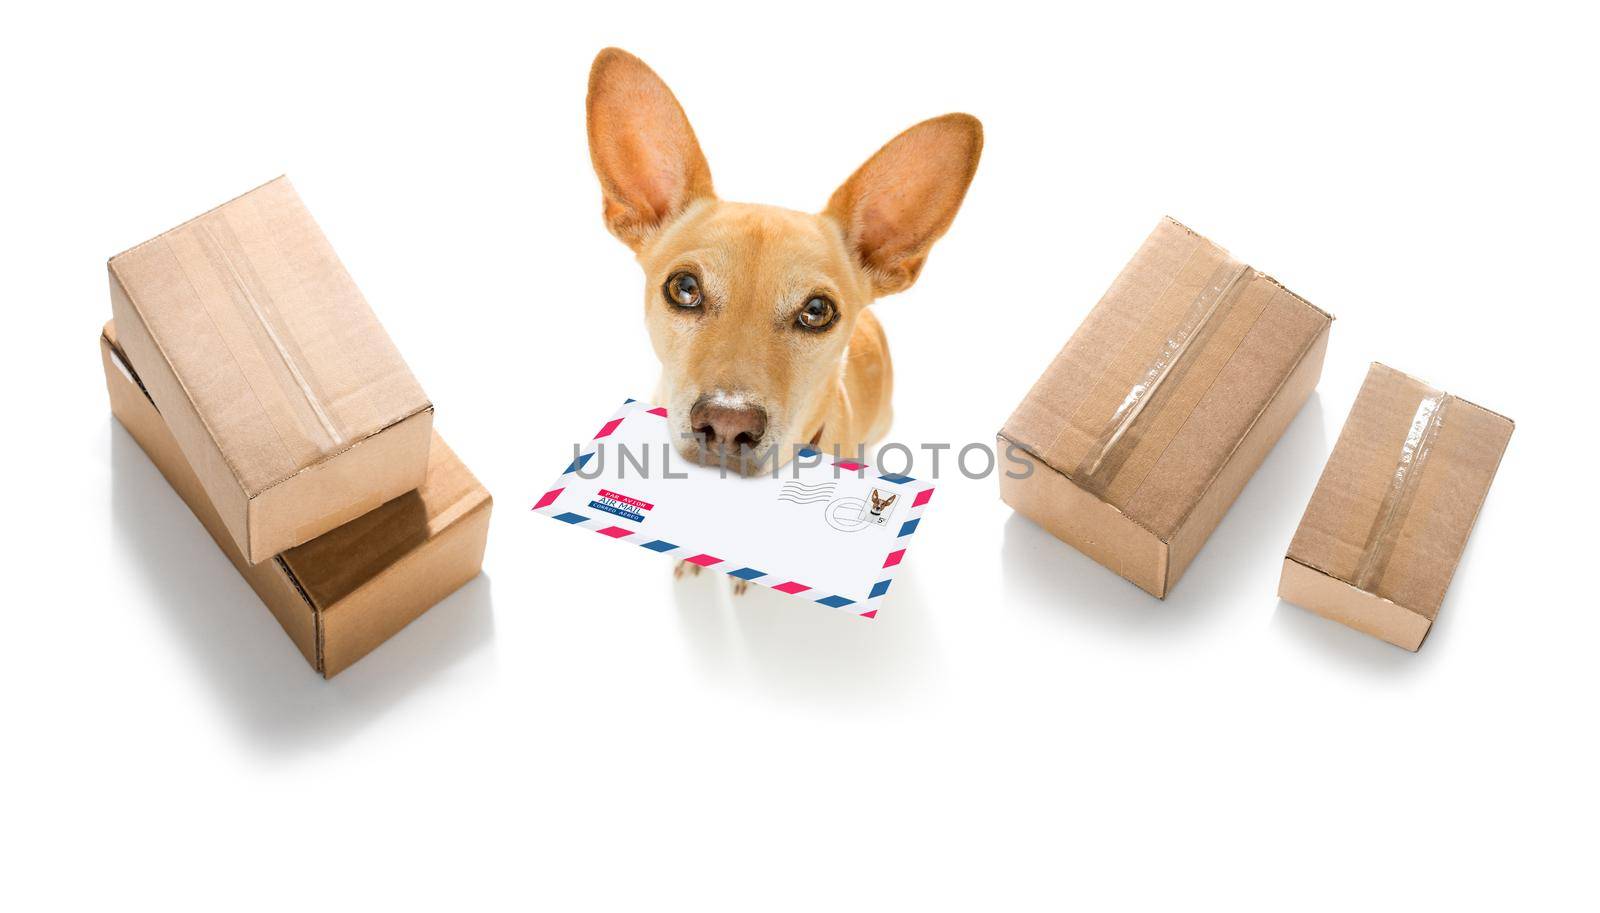 postman chihuahua dog delivering a big white blank empty envelope, with boxes and packages